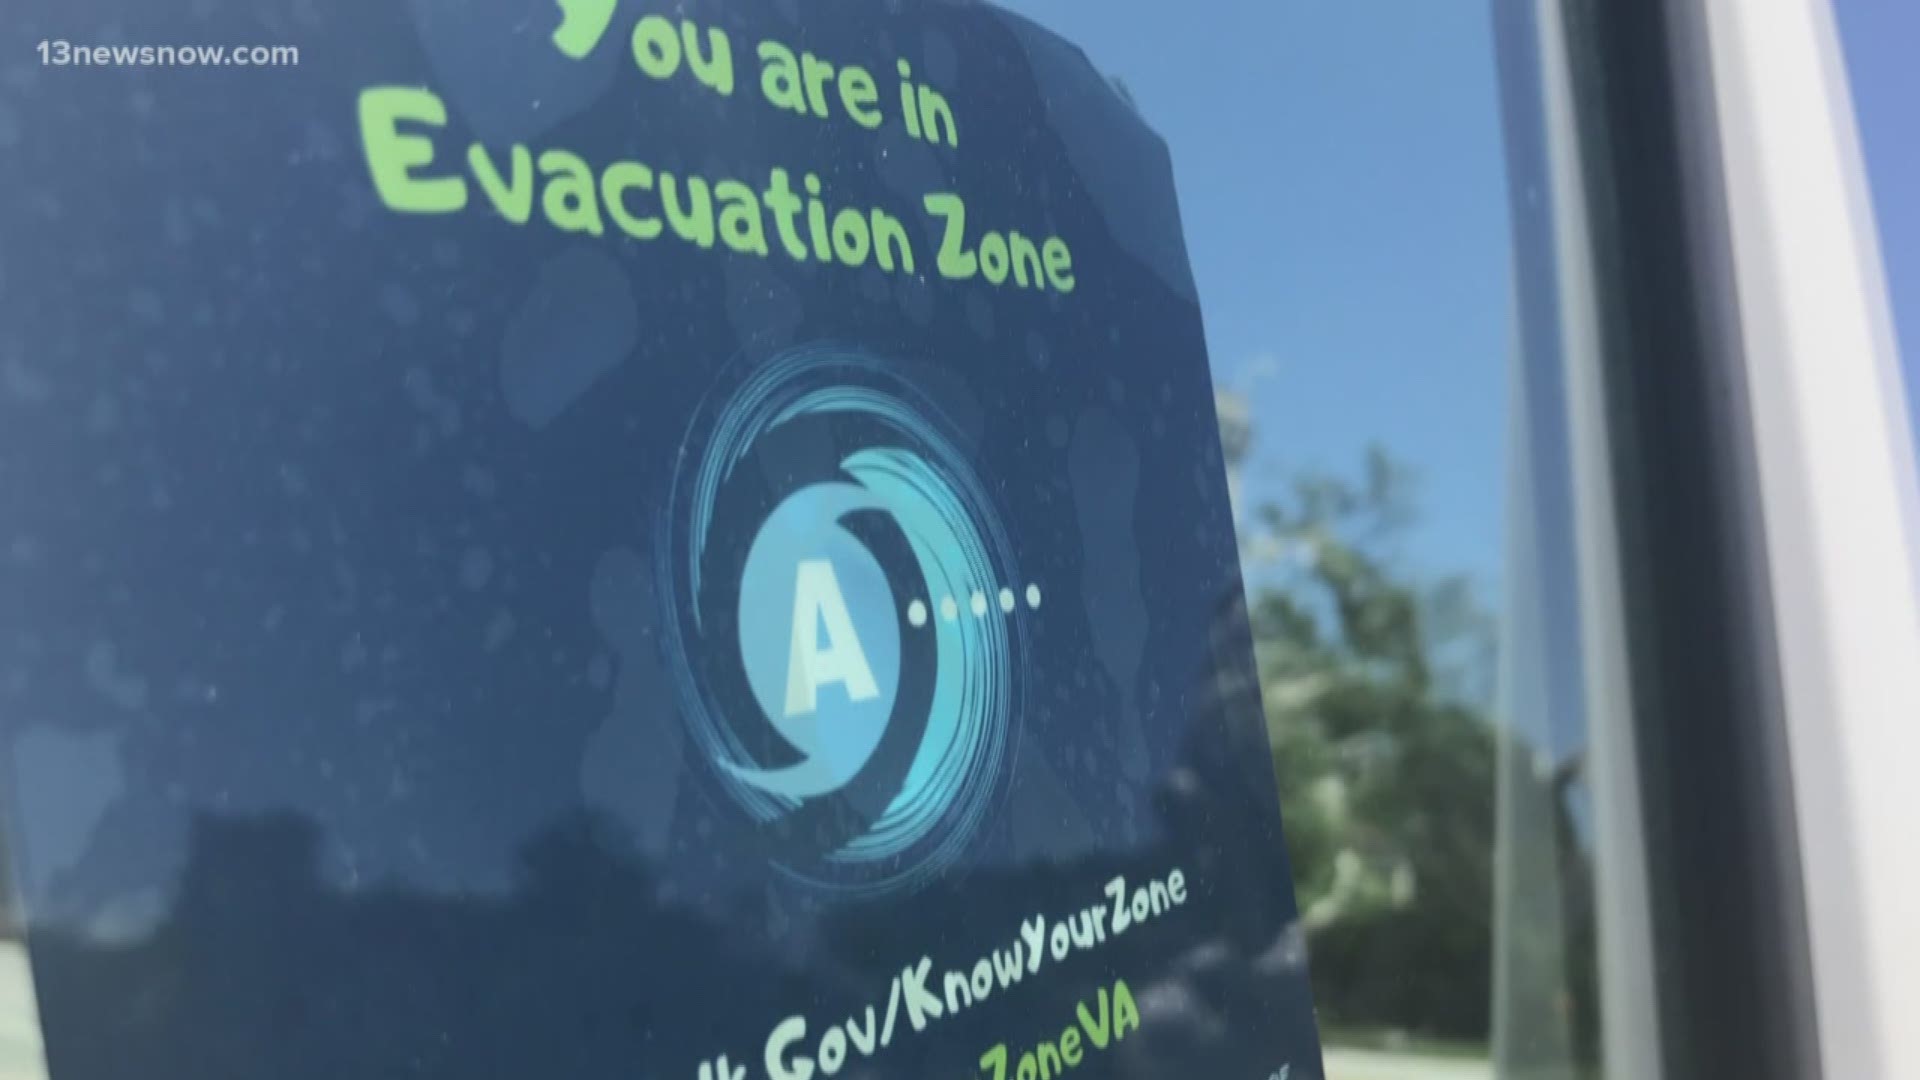 Hurricane season is just around the corner and the City of Norfolk is including businesses in their campaign so people are aware of their zone.